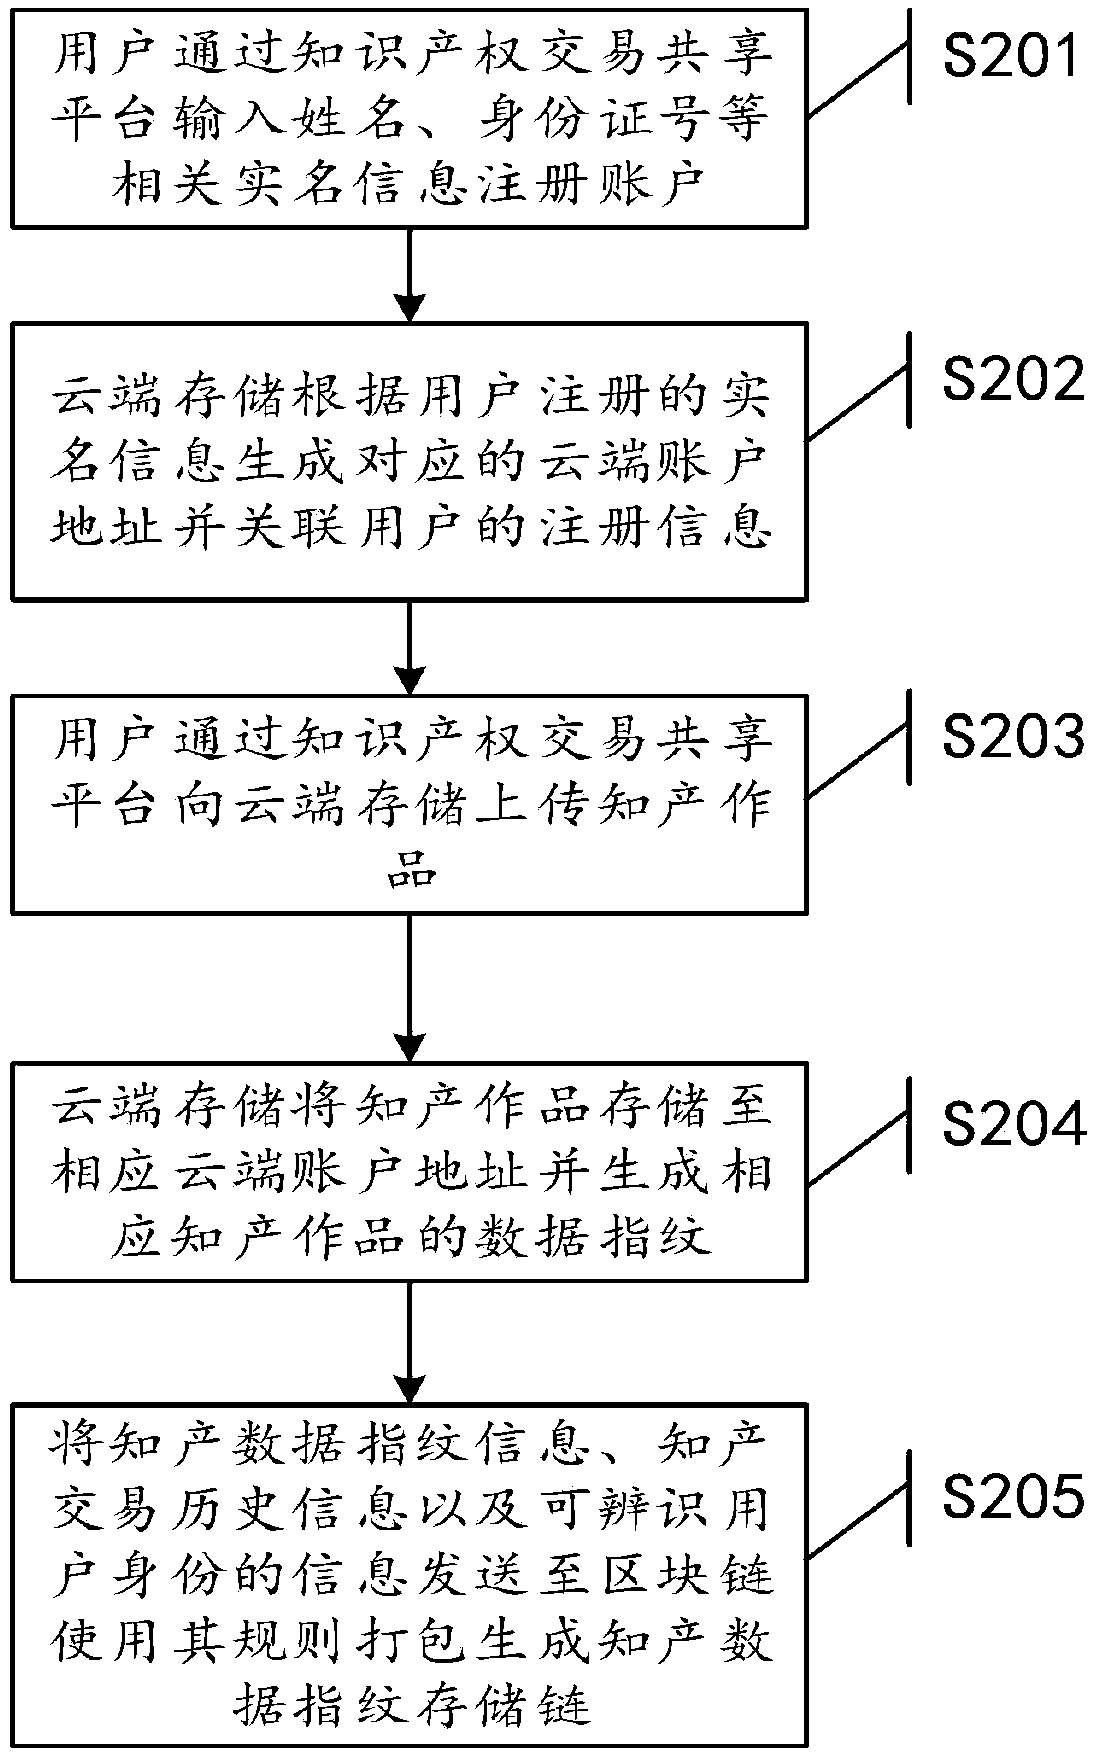 Intellectual property transaction sharing platform and method based on block chain